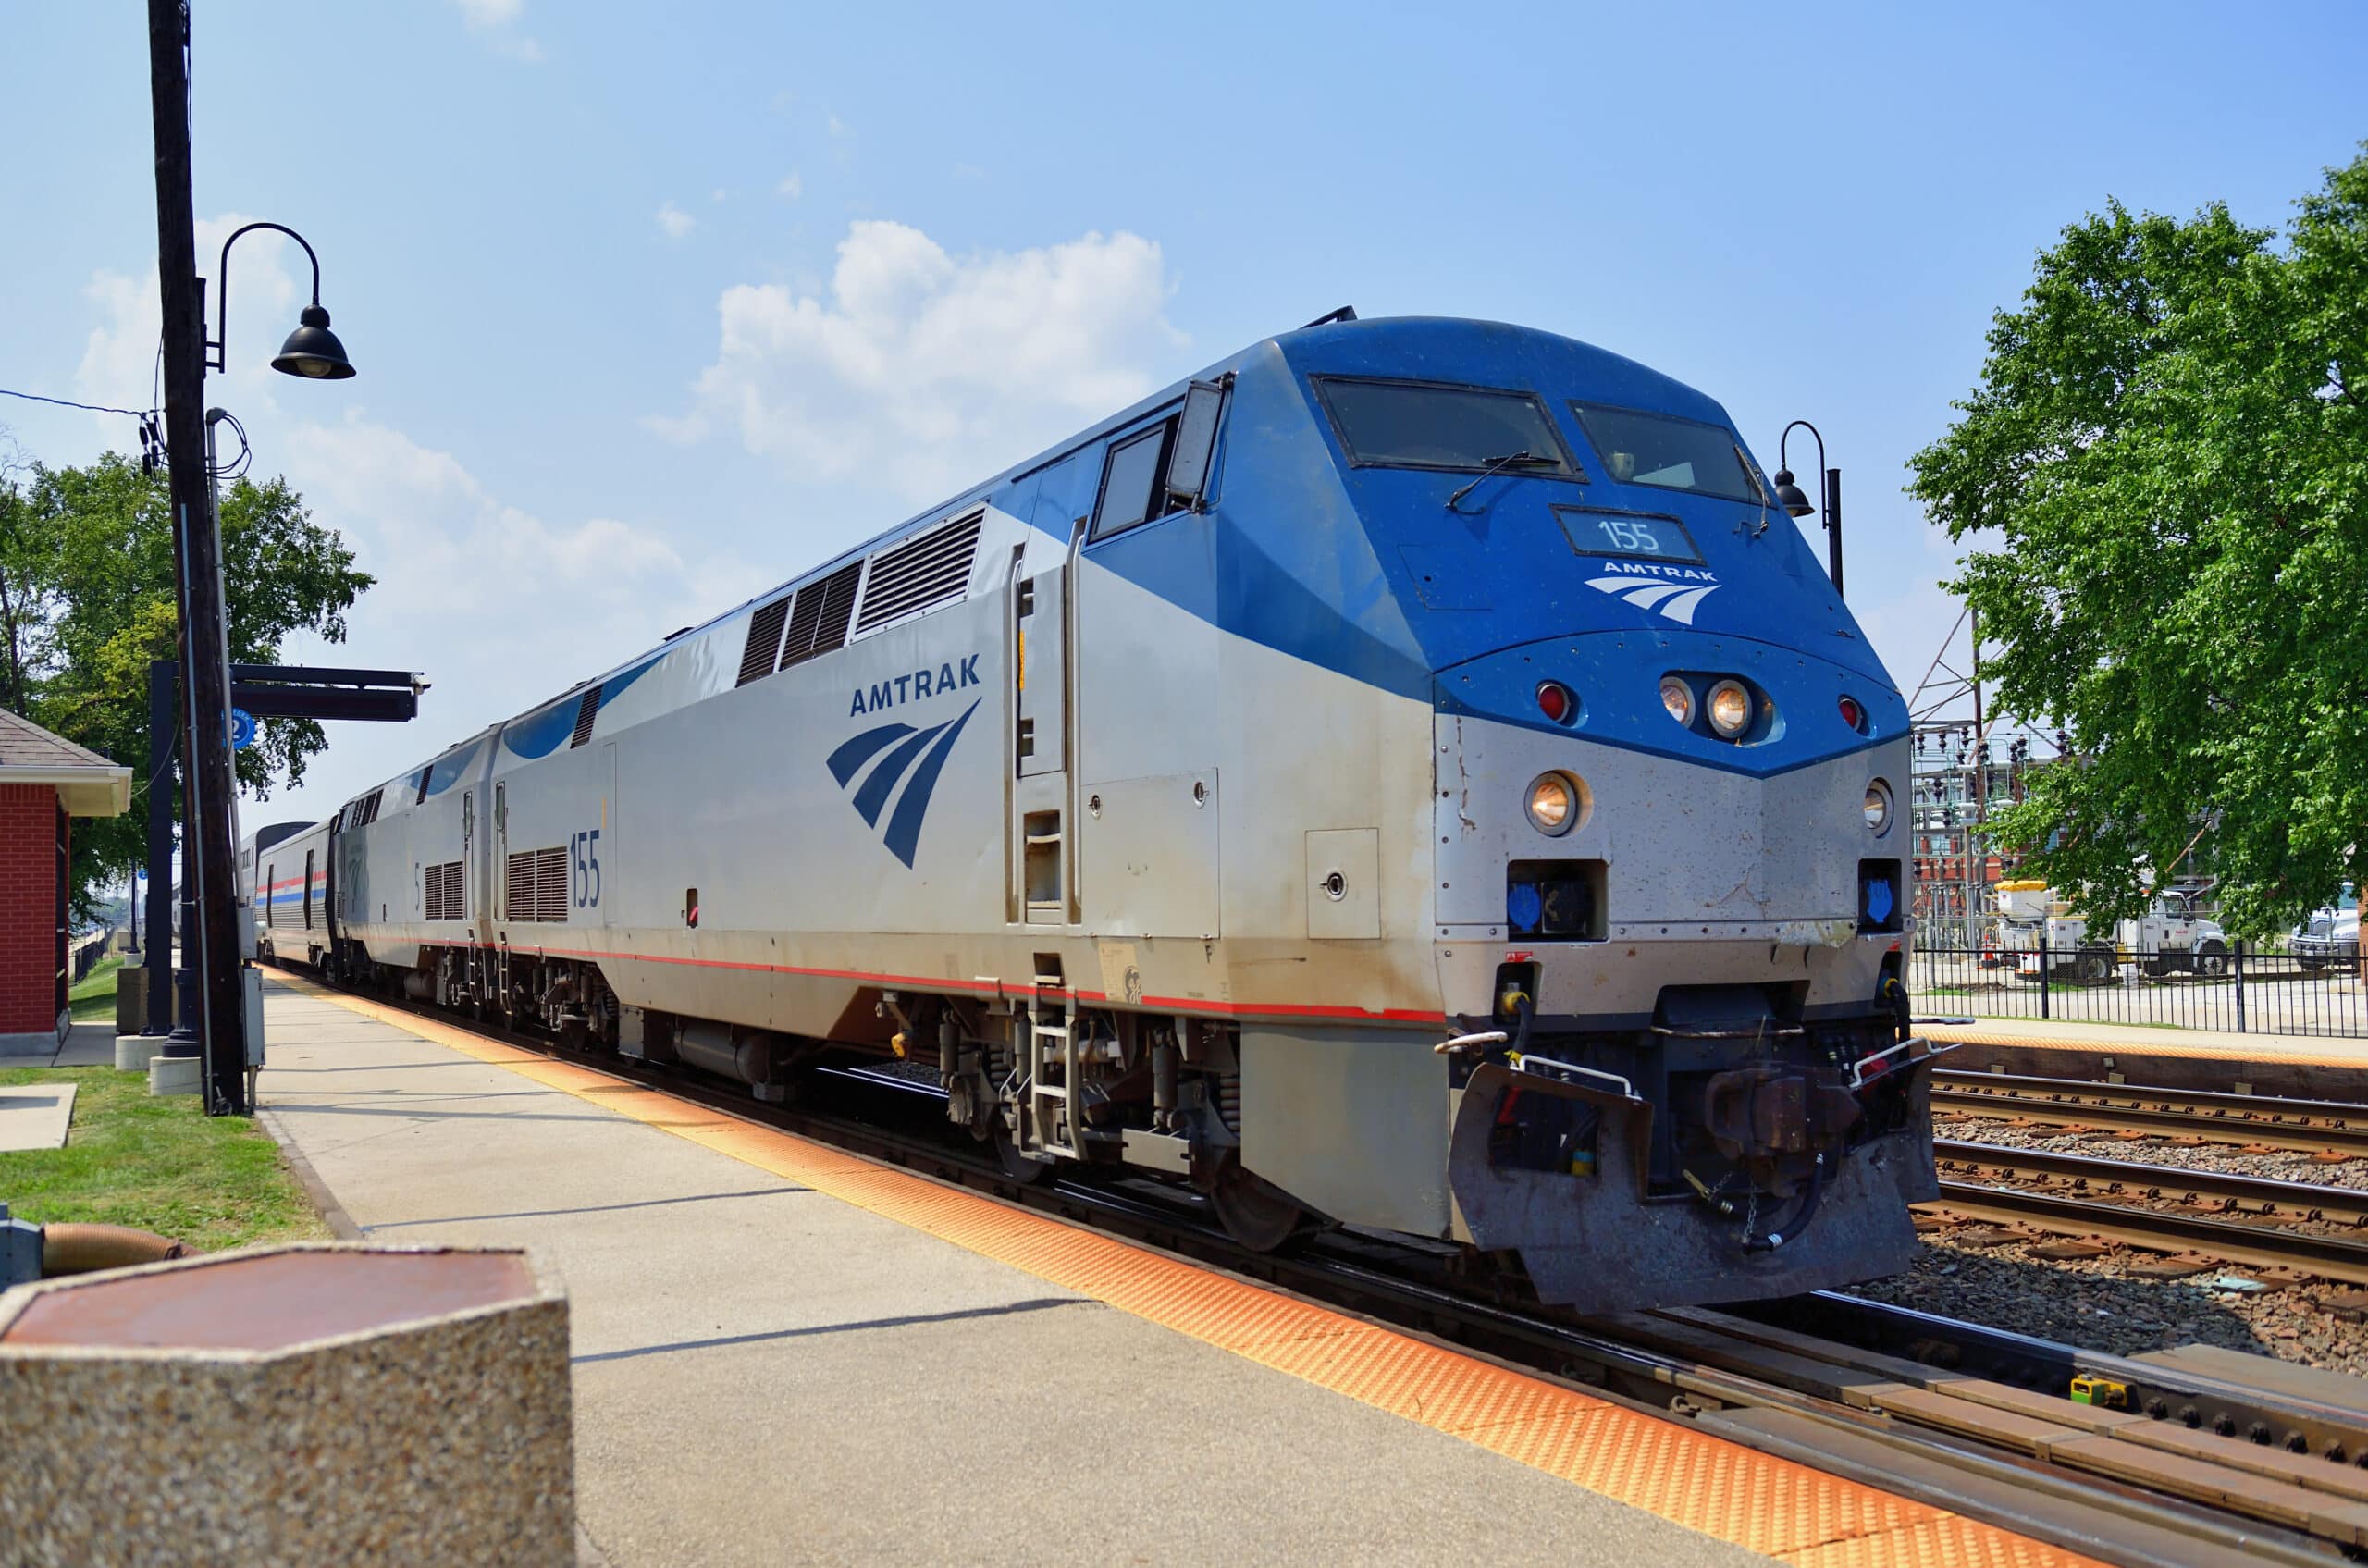 exterior front of Amtrak train